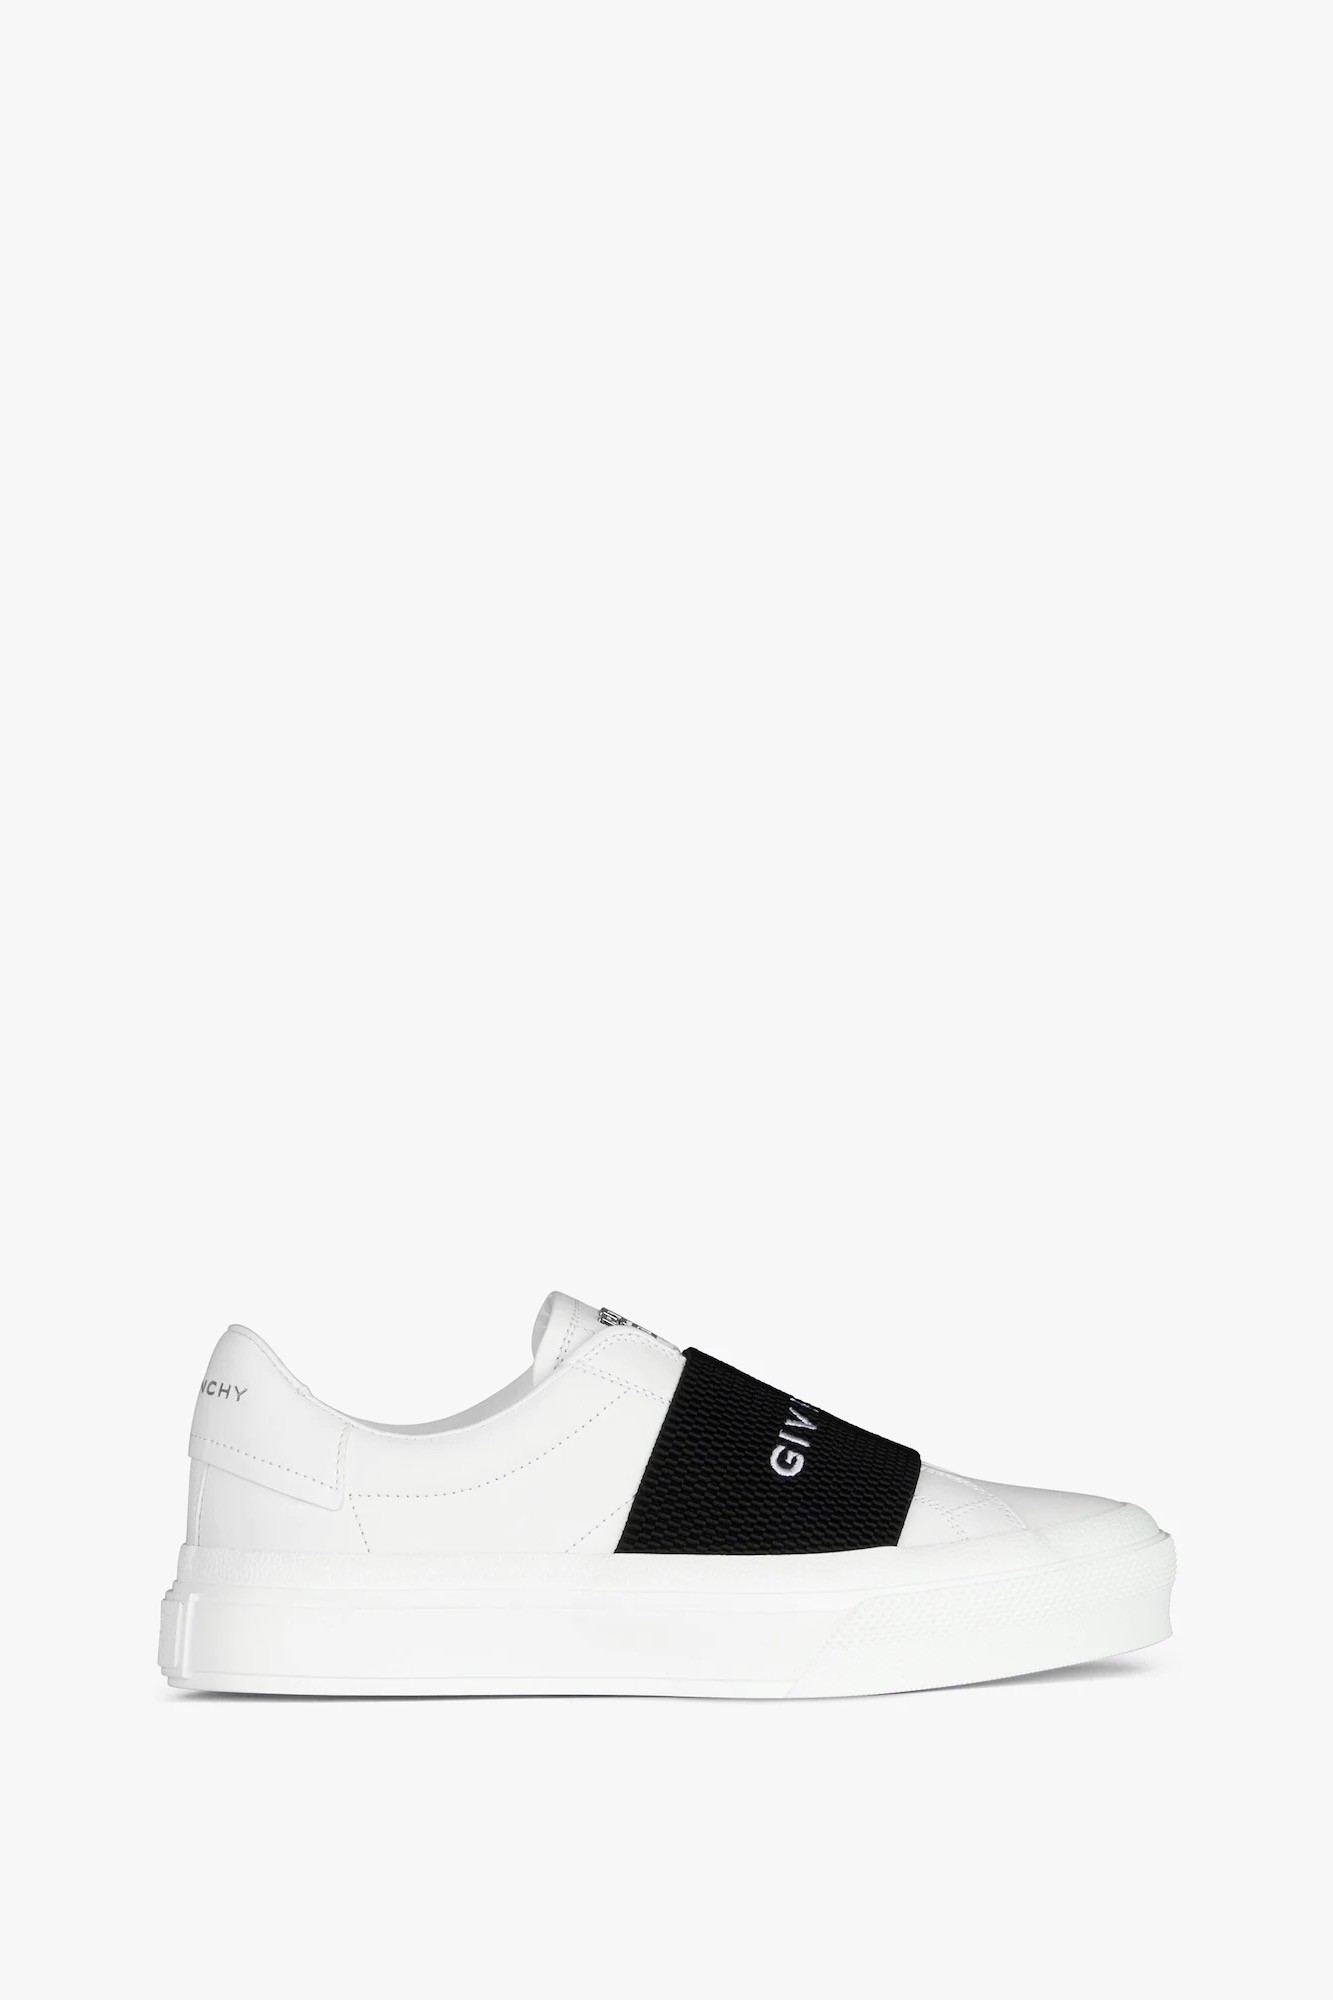 Sneakers In Leather With GIVENCHY Strap - white/black